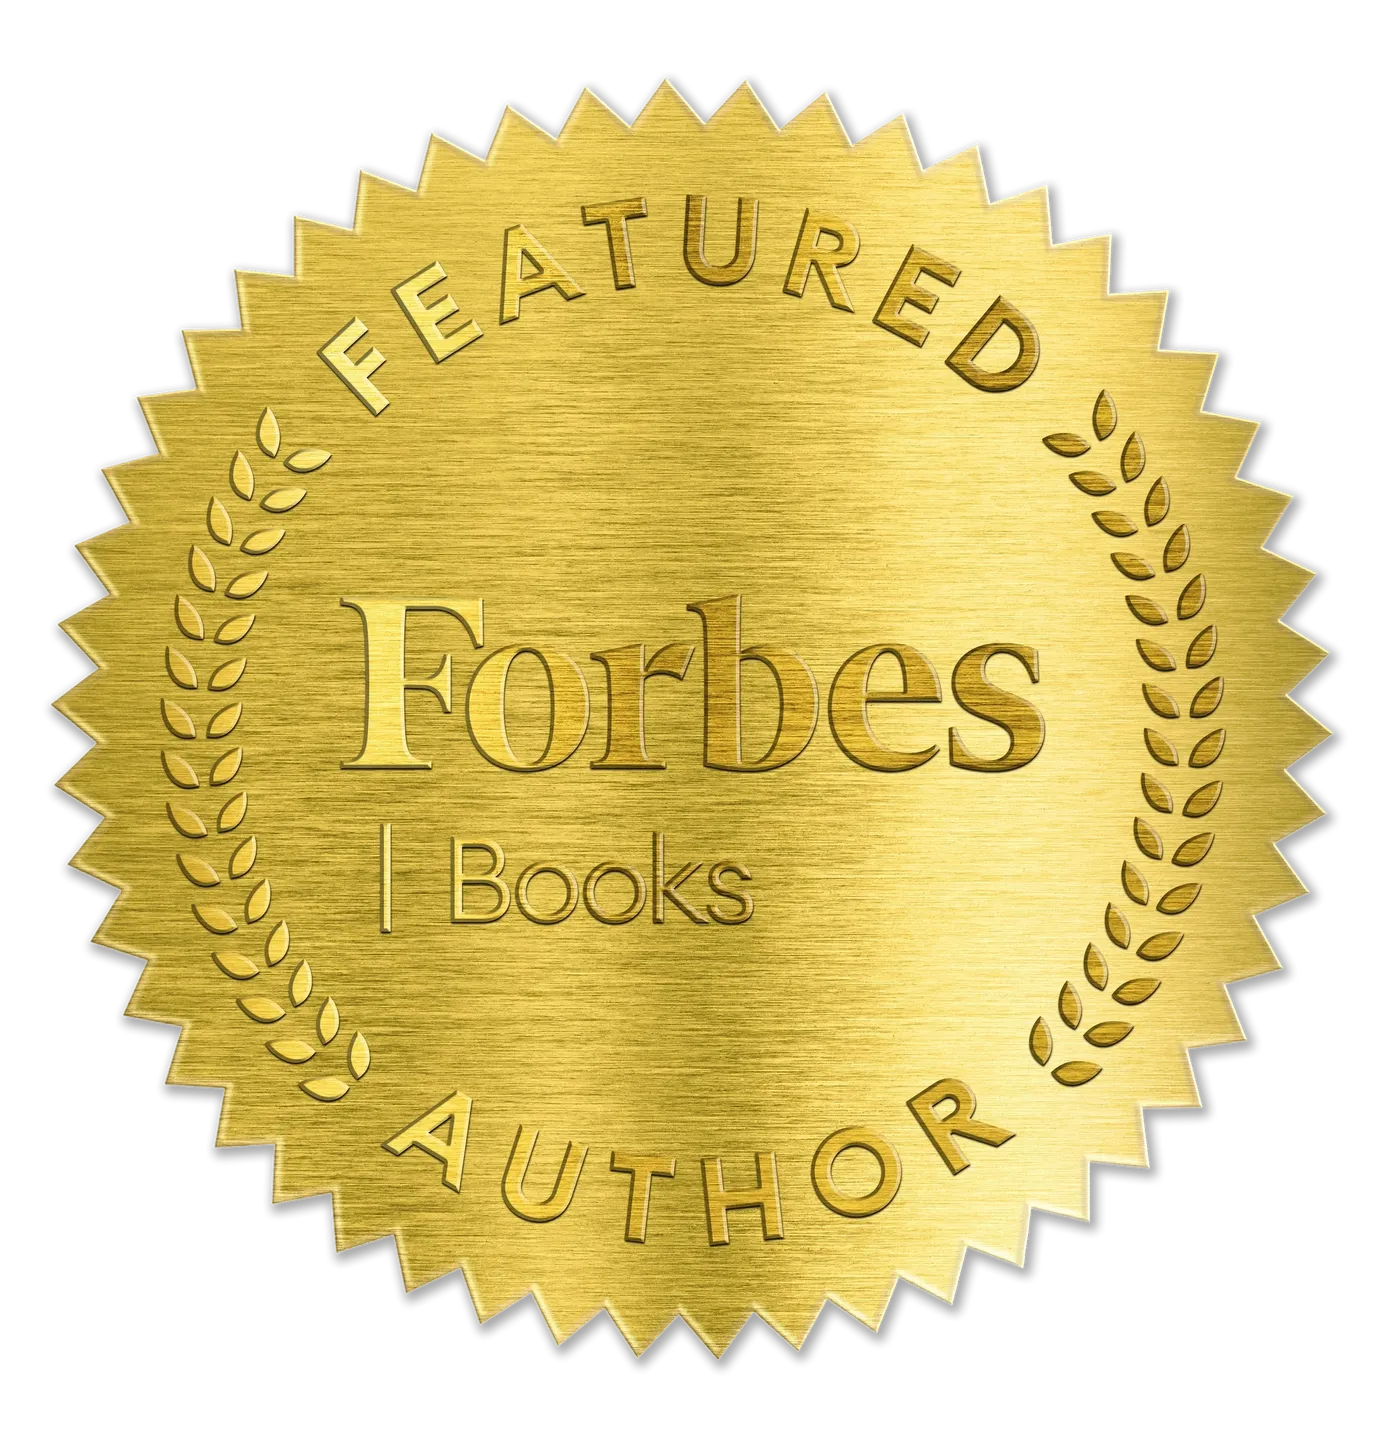 A gold seal that says featured author forbes books.